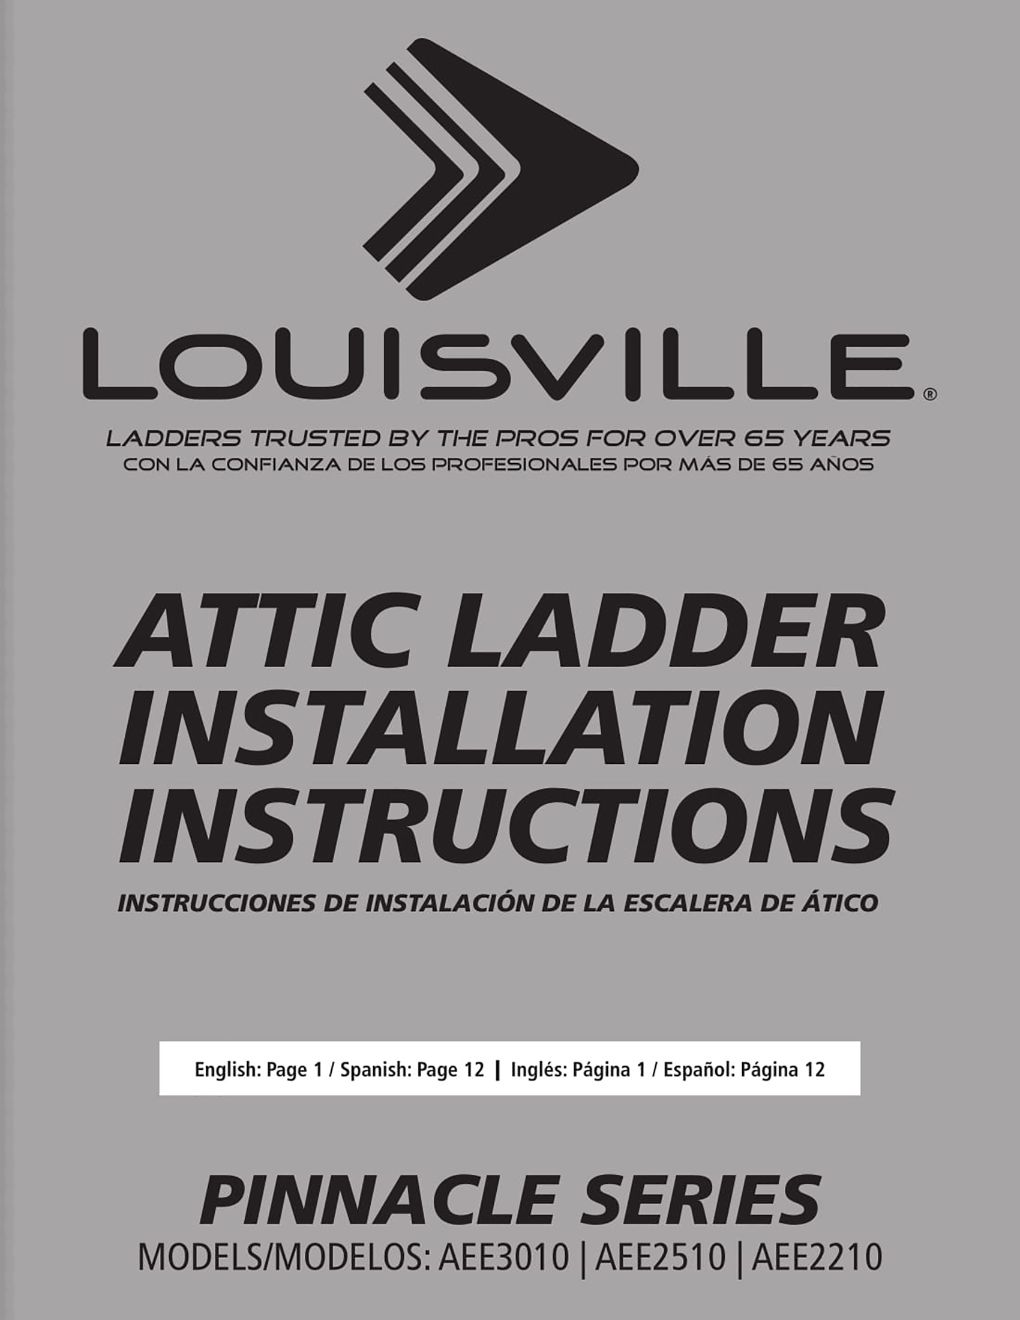 AEE2210 and AEE2510 Attic Ladders Installation Instructions Marketing Material Image